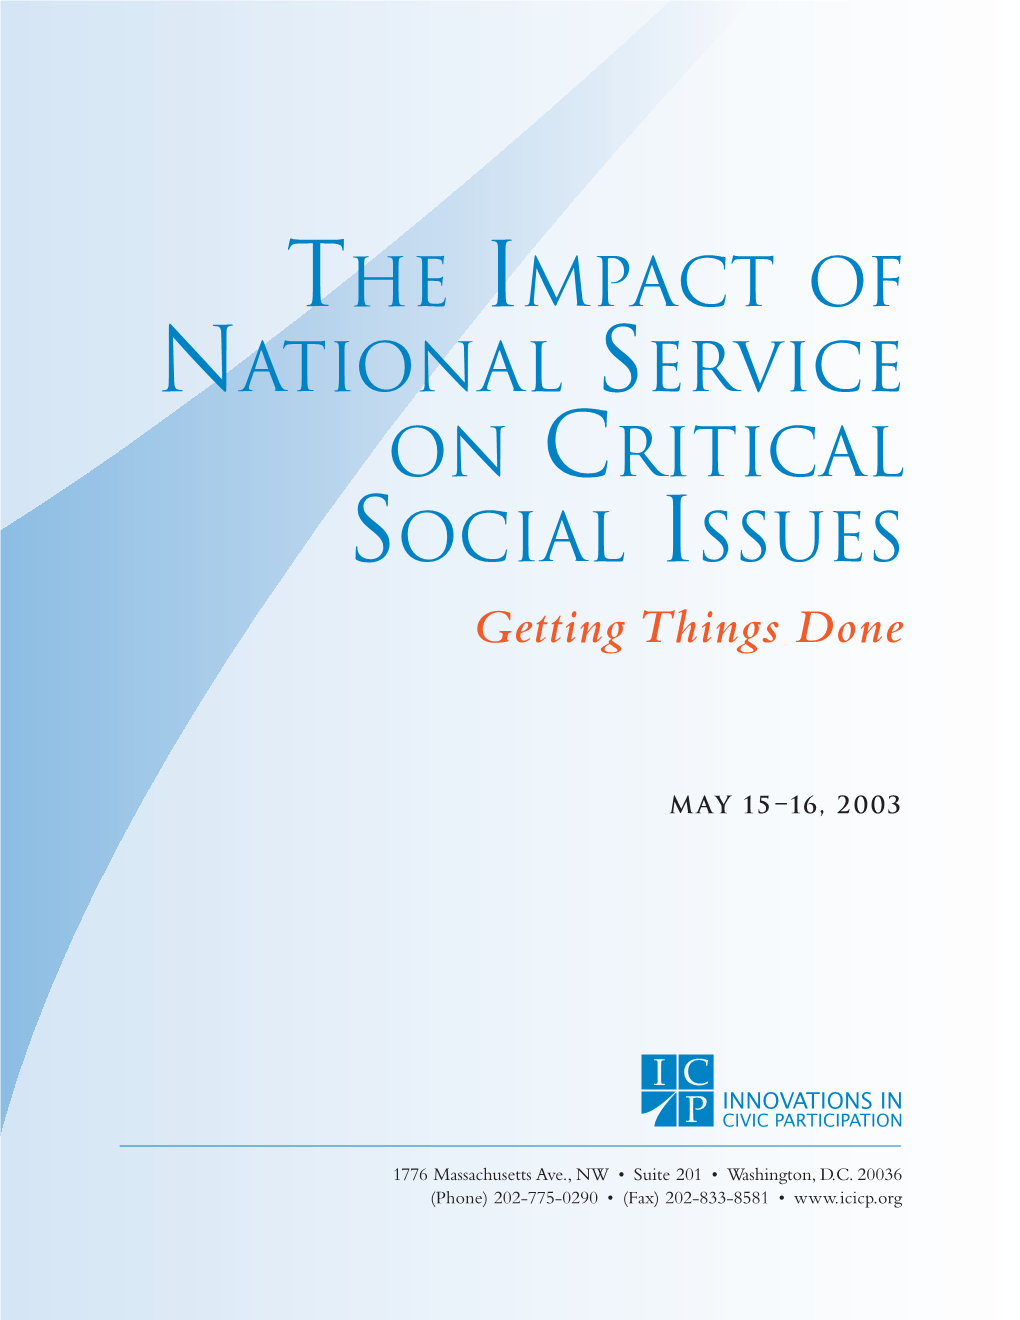 The Impact of National Service on Critical Social Issues